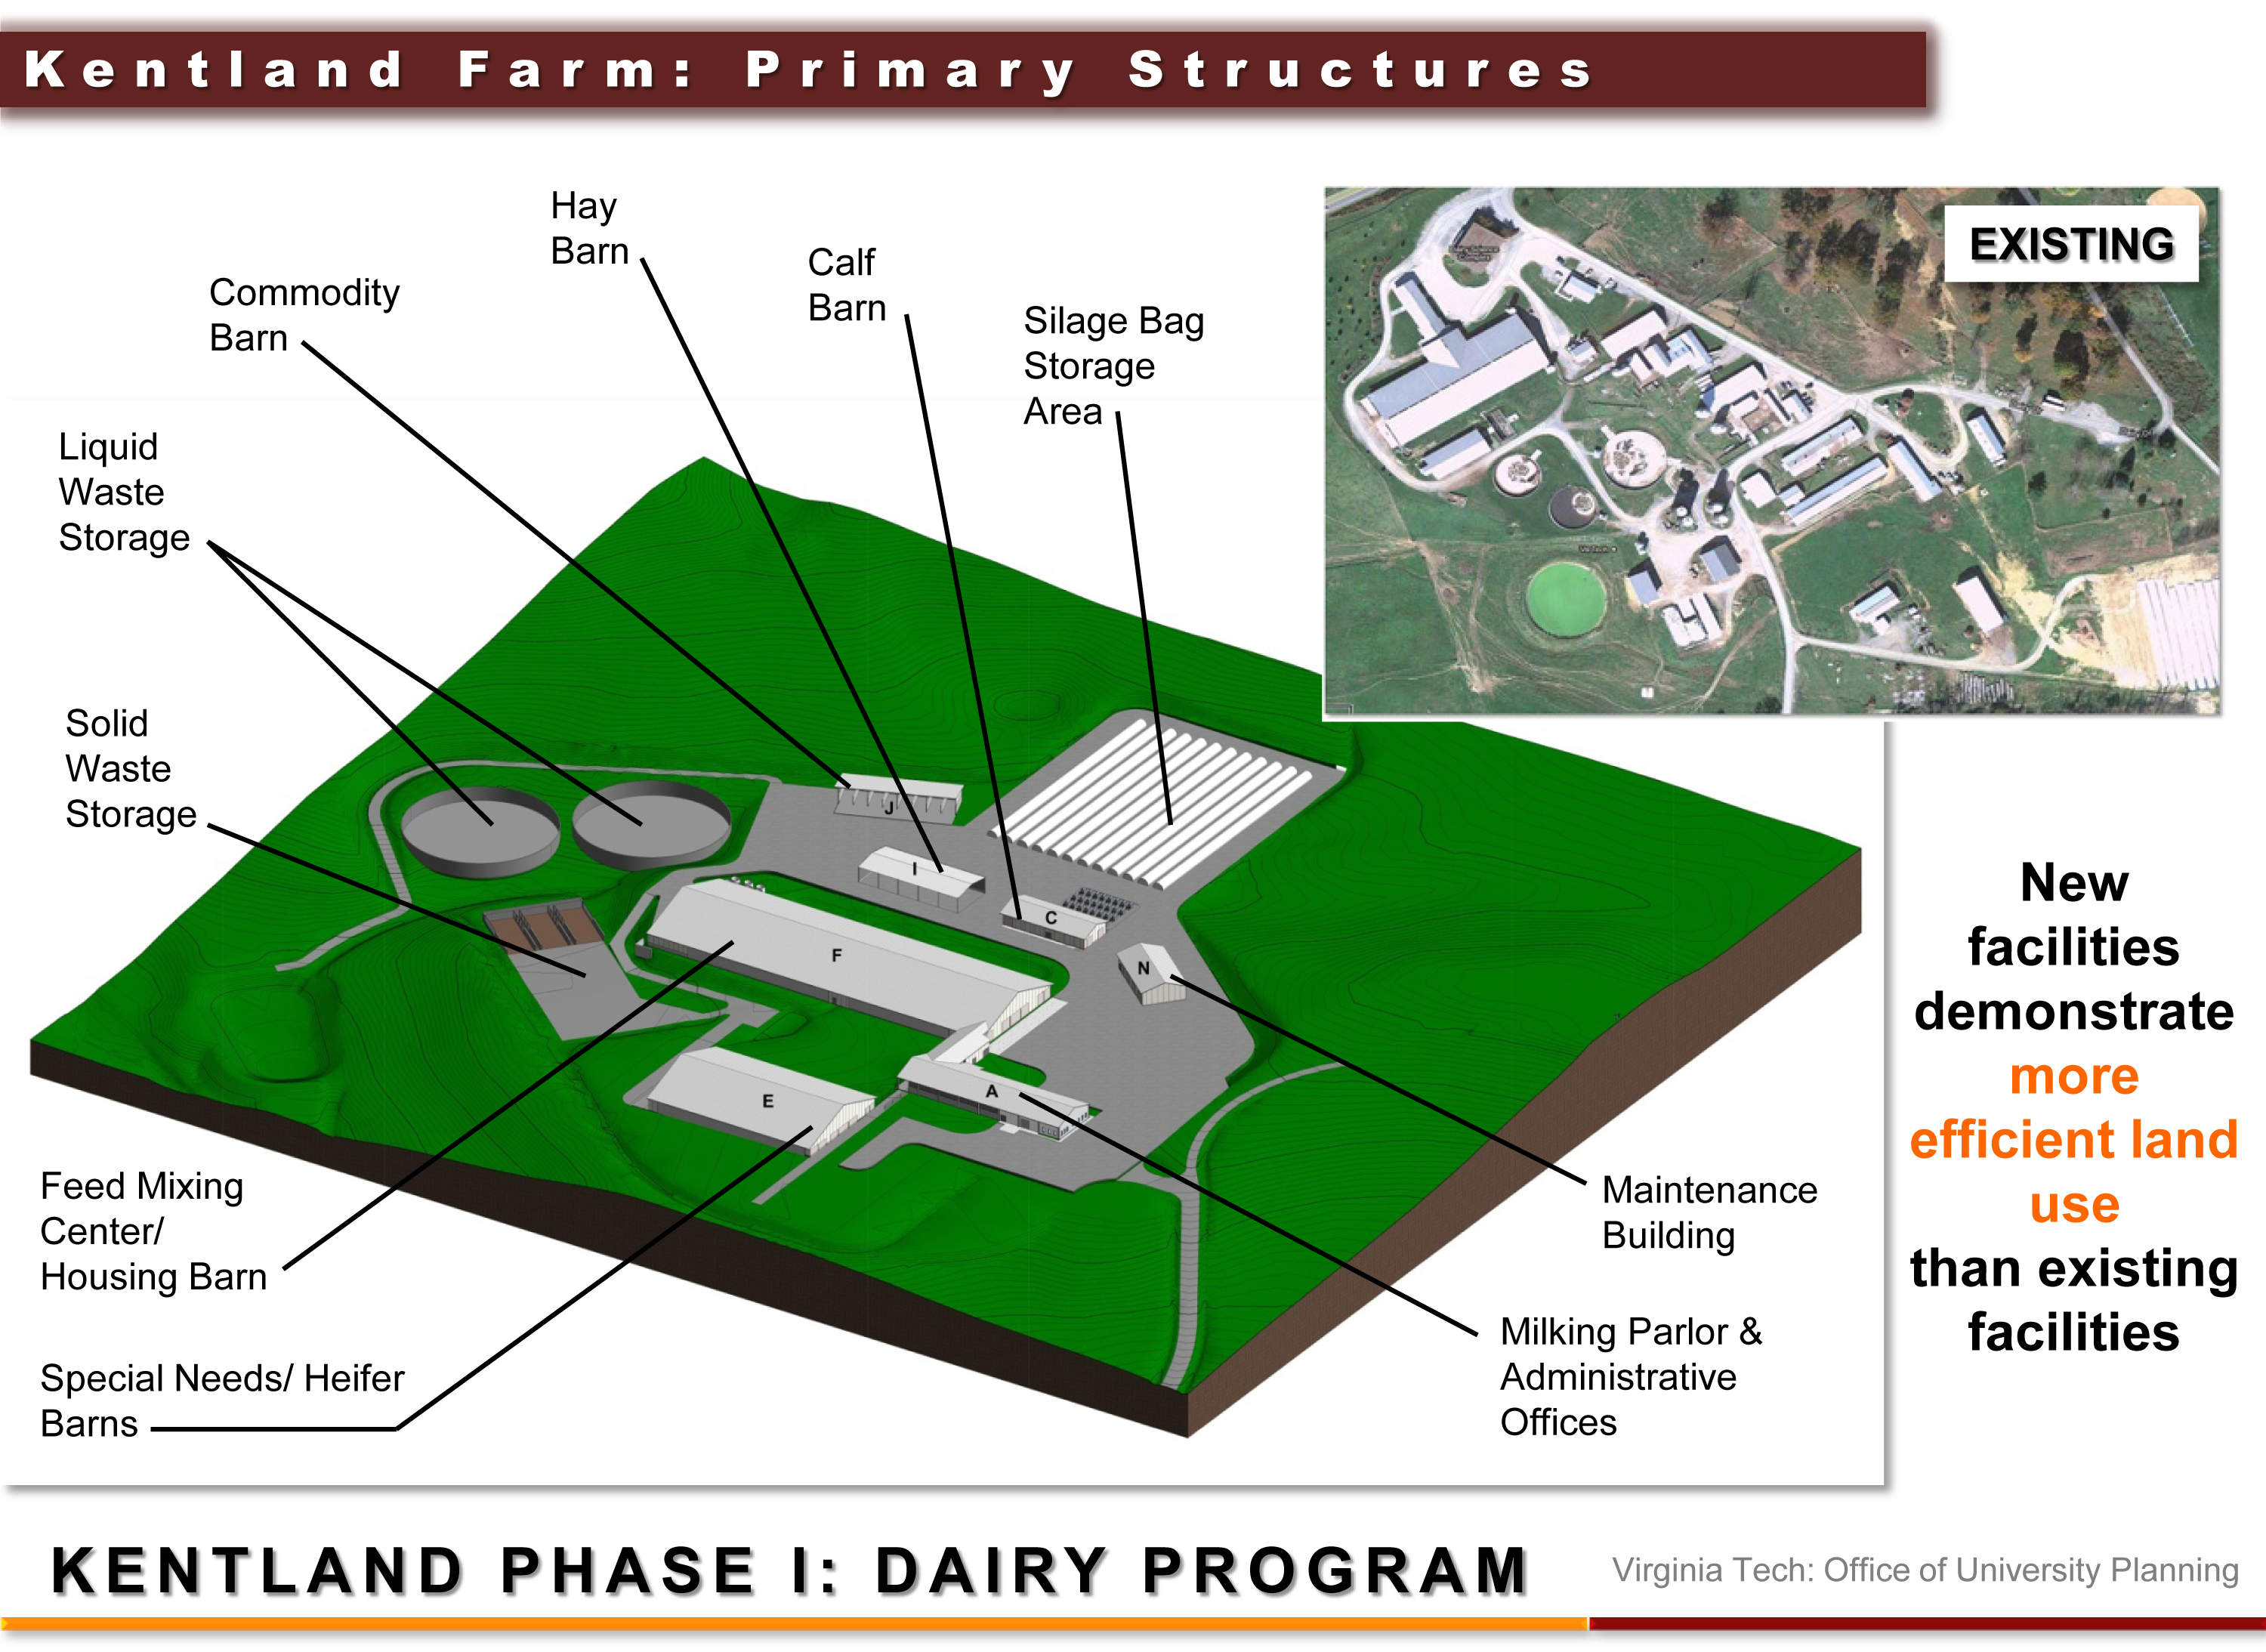 Modern dairy complex approved for Kentland Farm